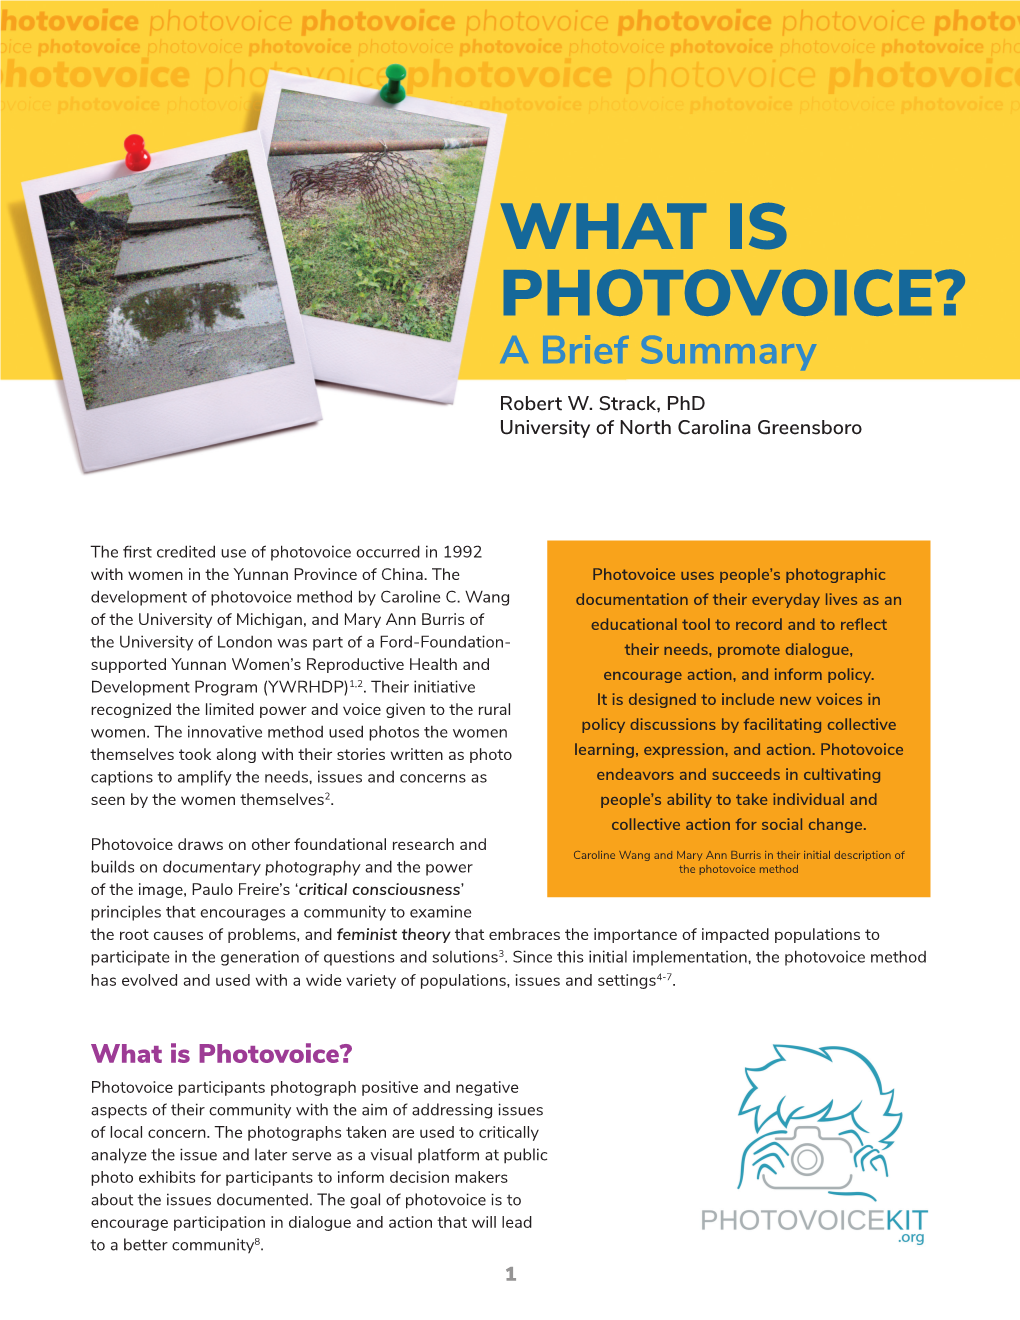 What Is Photovoice-A Brief Summary